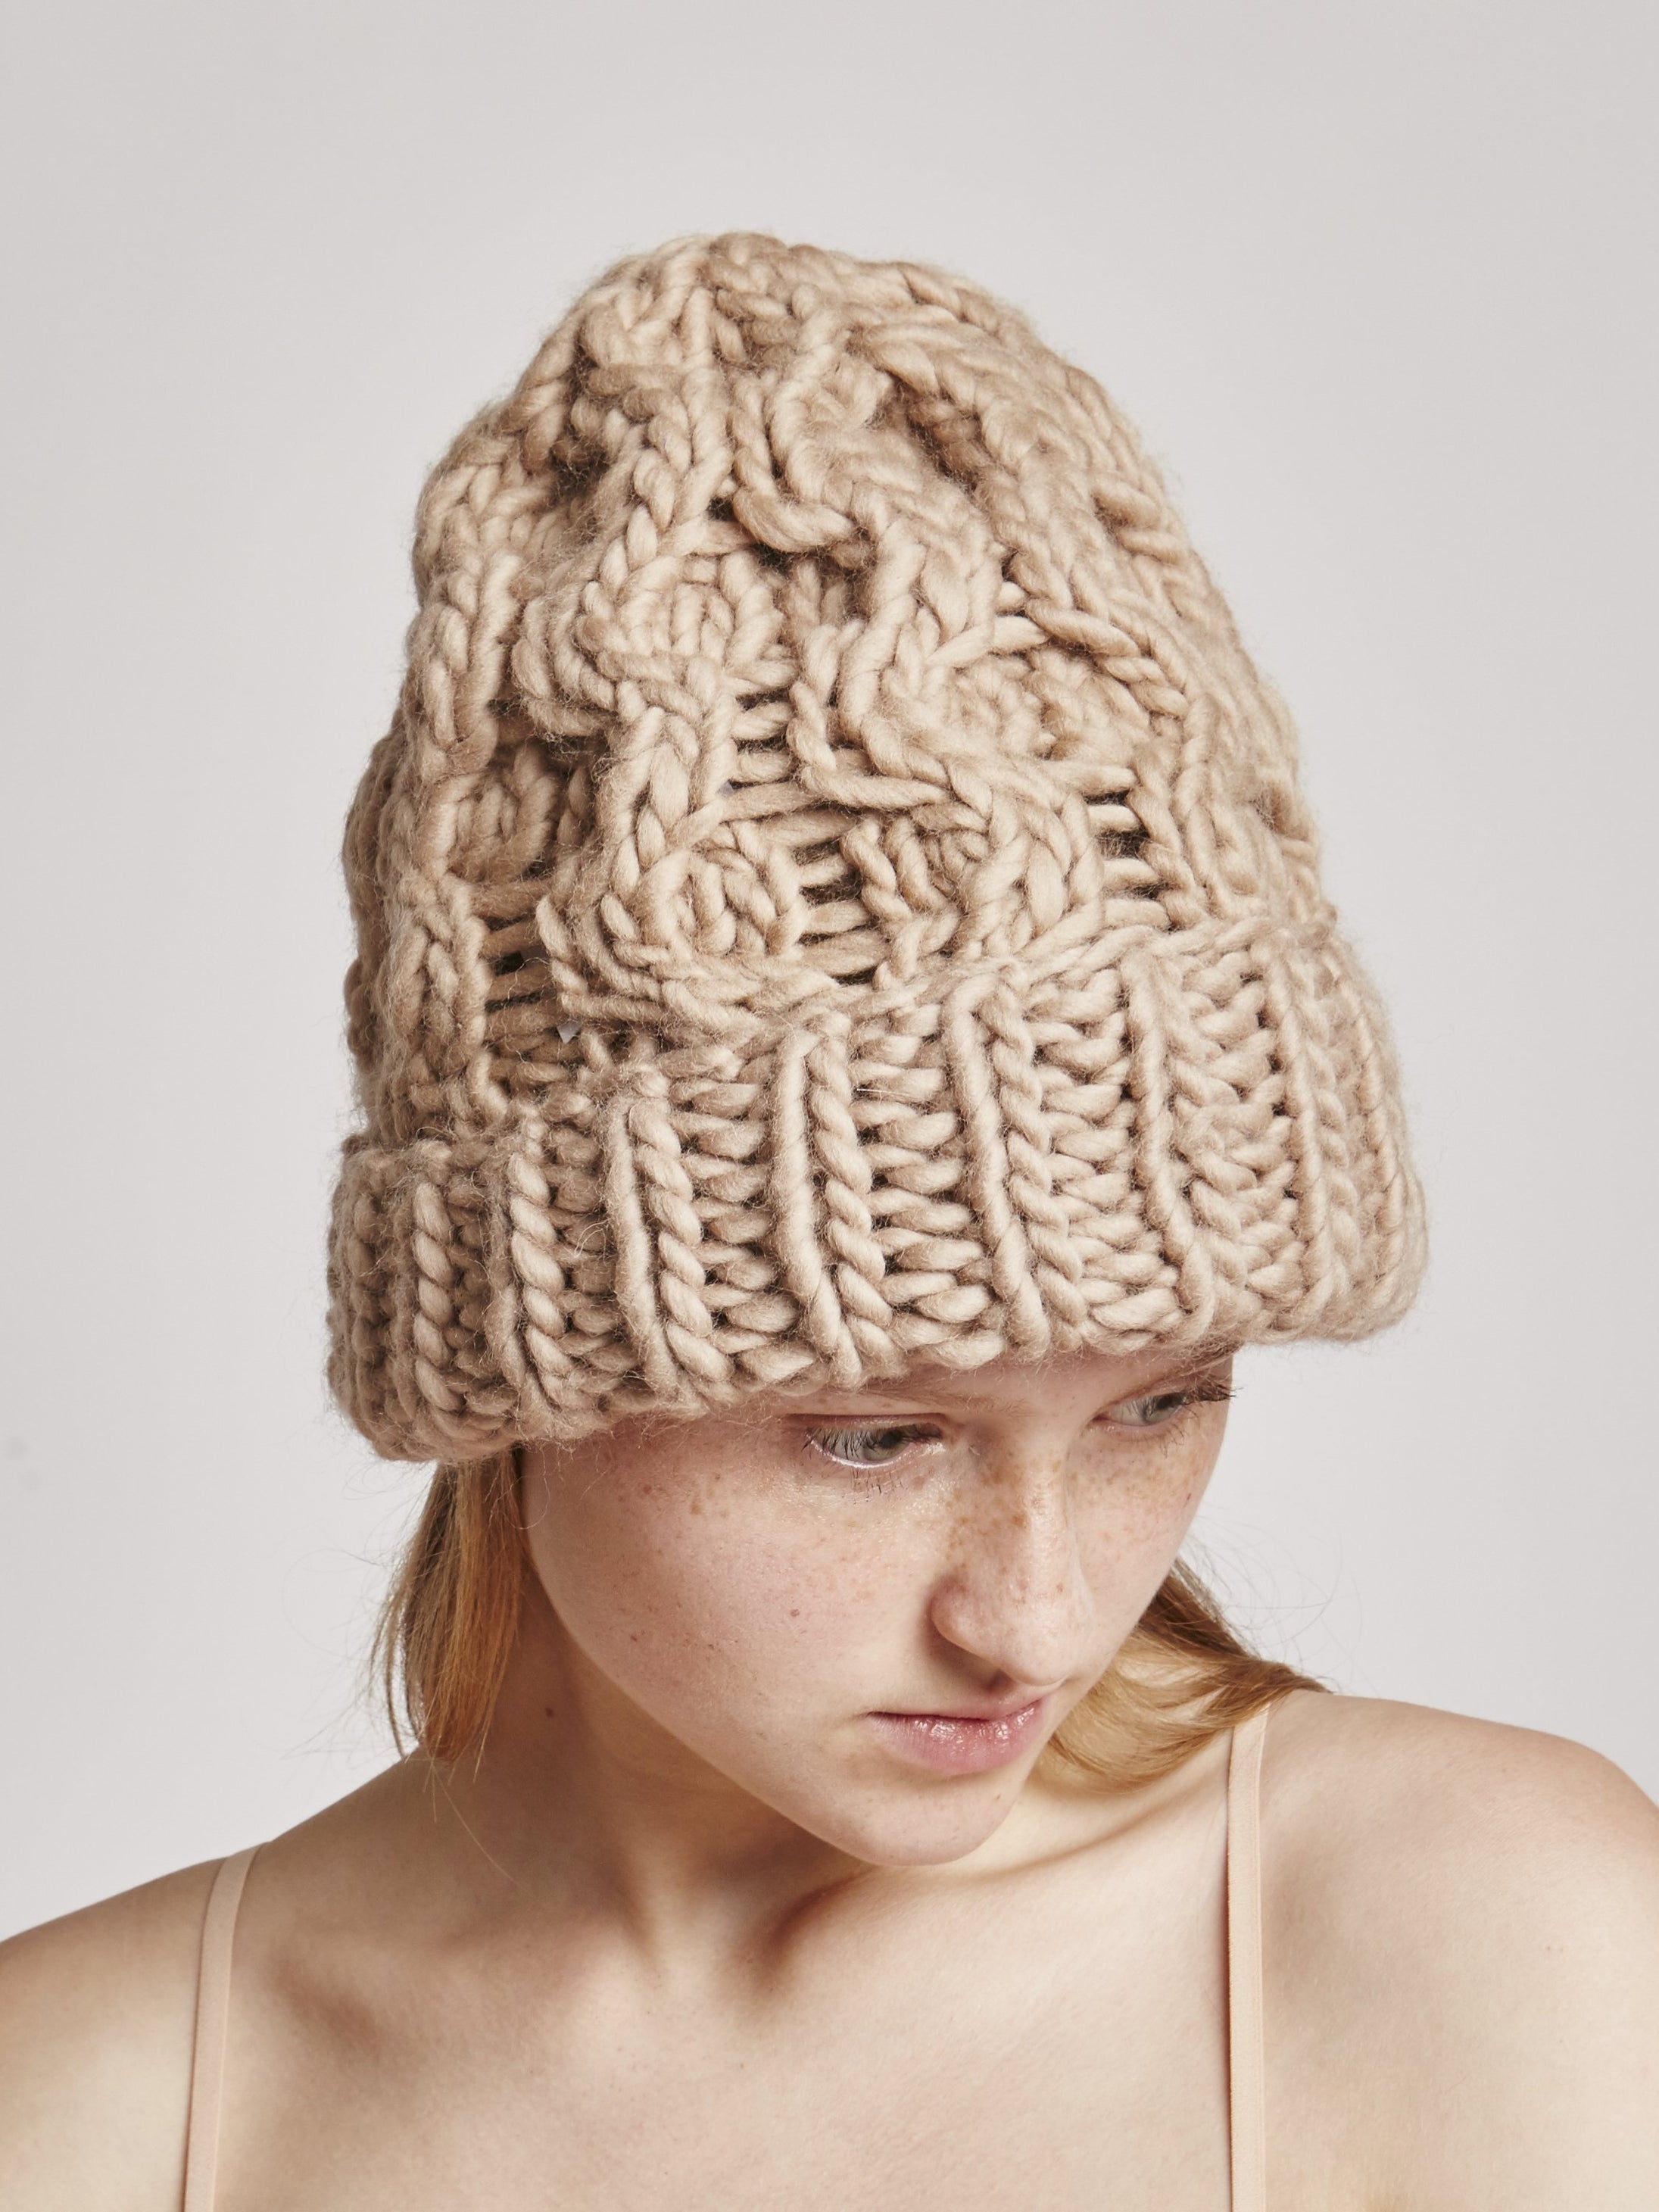 Honey beanie in taupe